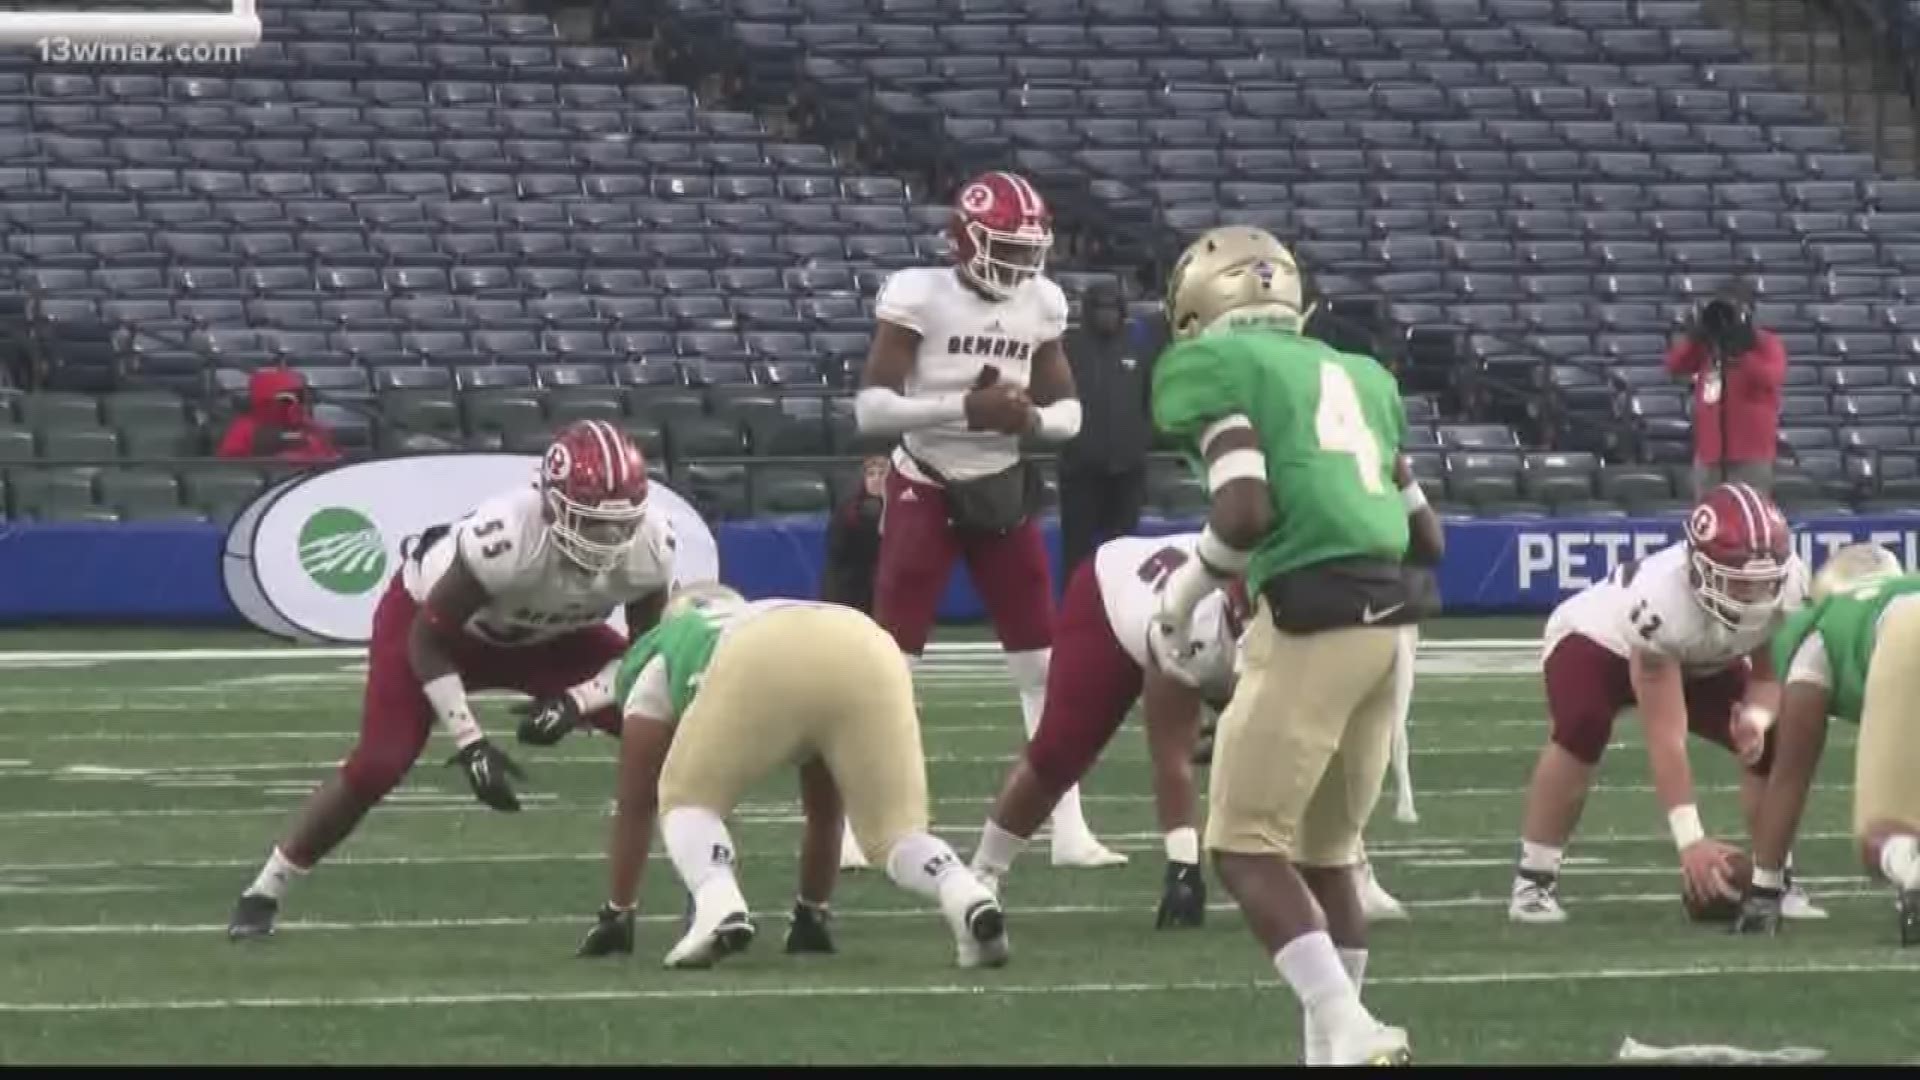 Warner Robins and Buford battled into overtime Friday night to decide the GHSA 5A State Championship with Buford kicking a field goal to win the game 17-14.